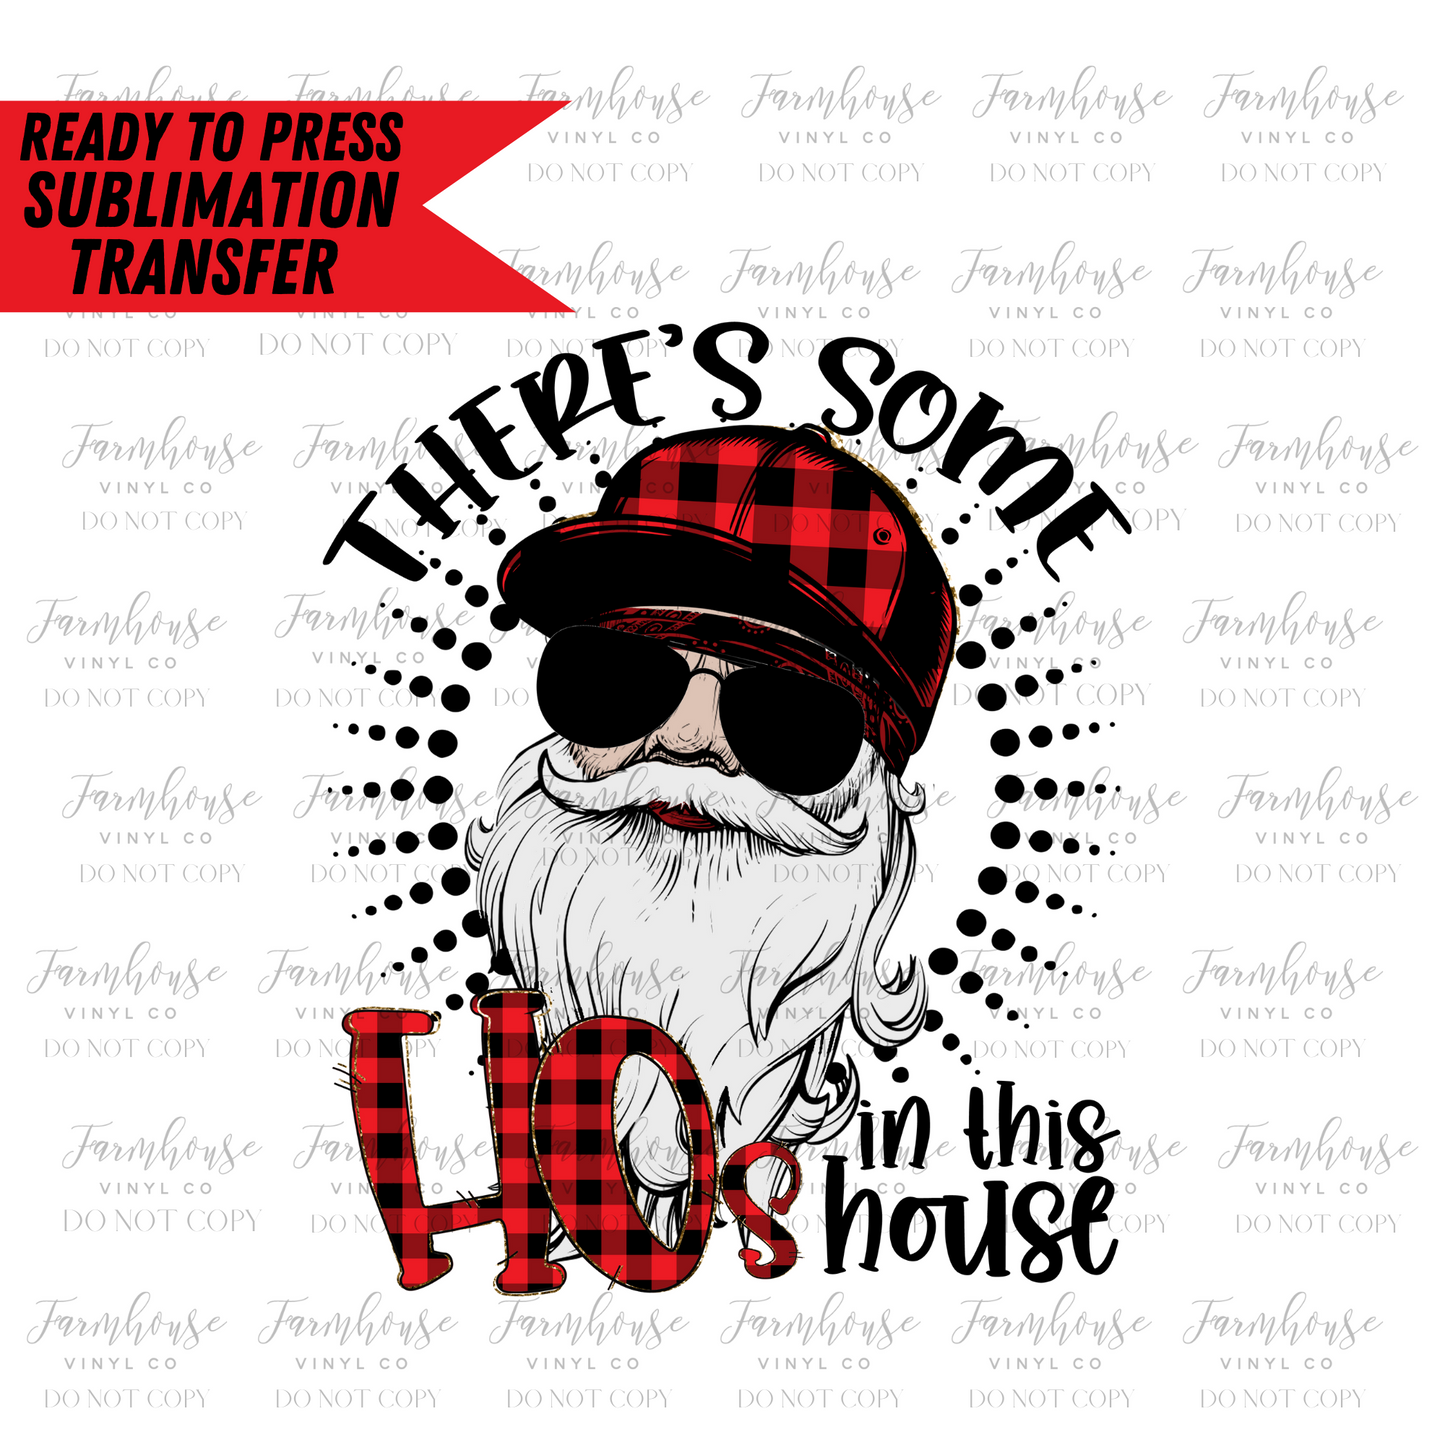 Theres Some Hos In This House Ready To Press Sublimation Transfer - Farmhouse Vinyl Co